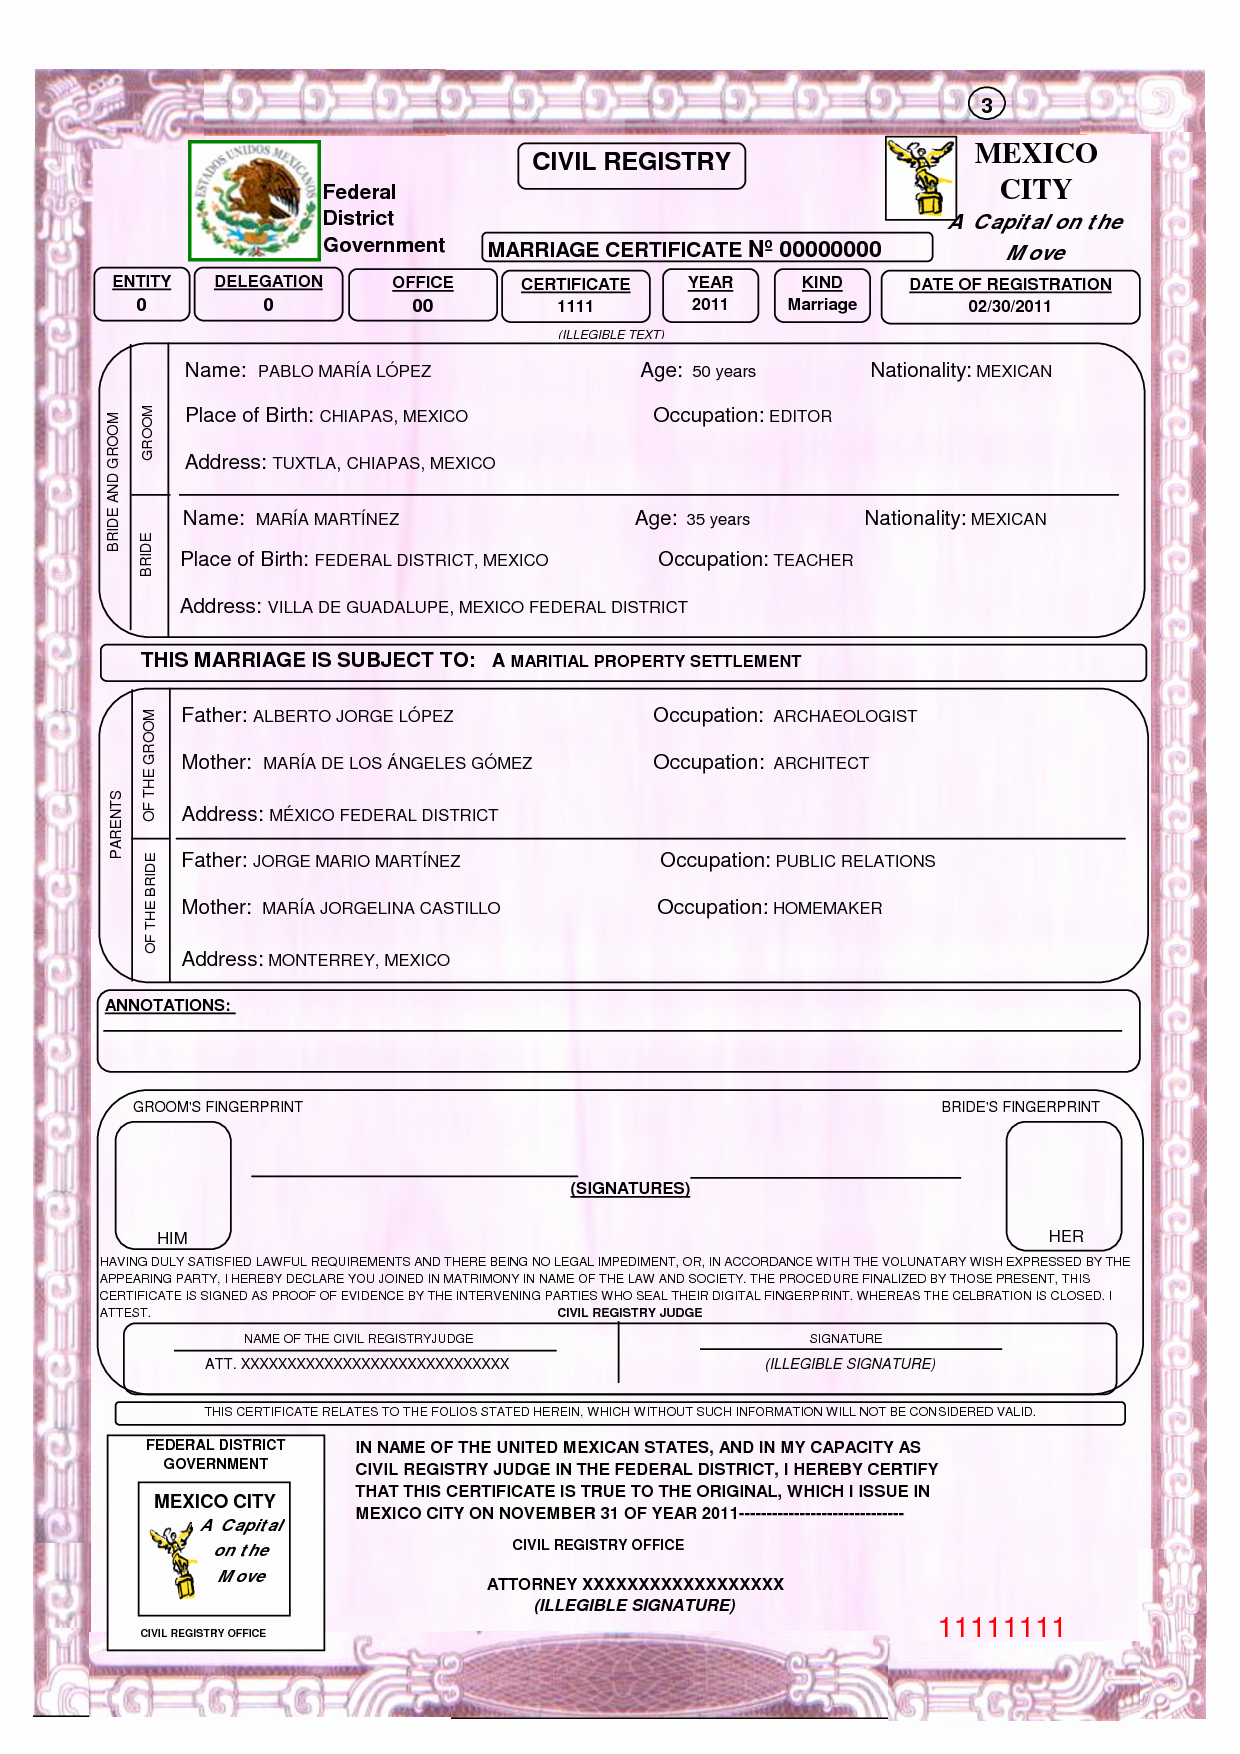 Marriage Certificate Translation From Spanish to English Template New Best S Of Mexican Birth Certificate Translation